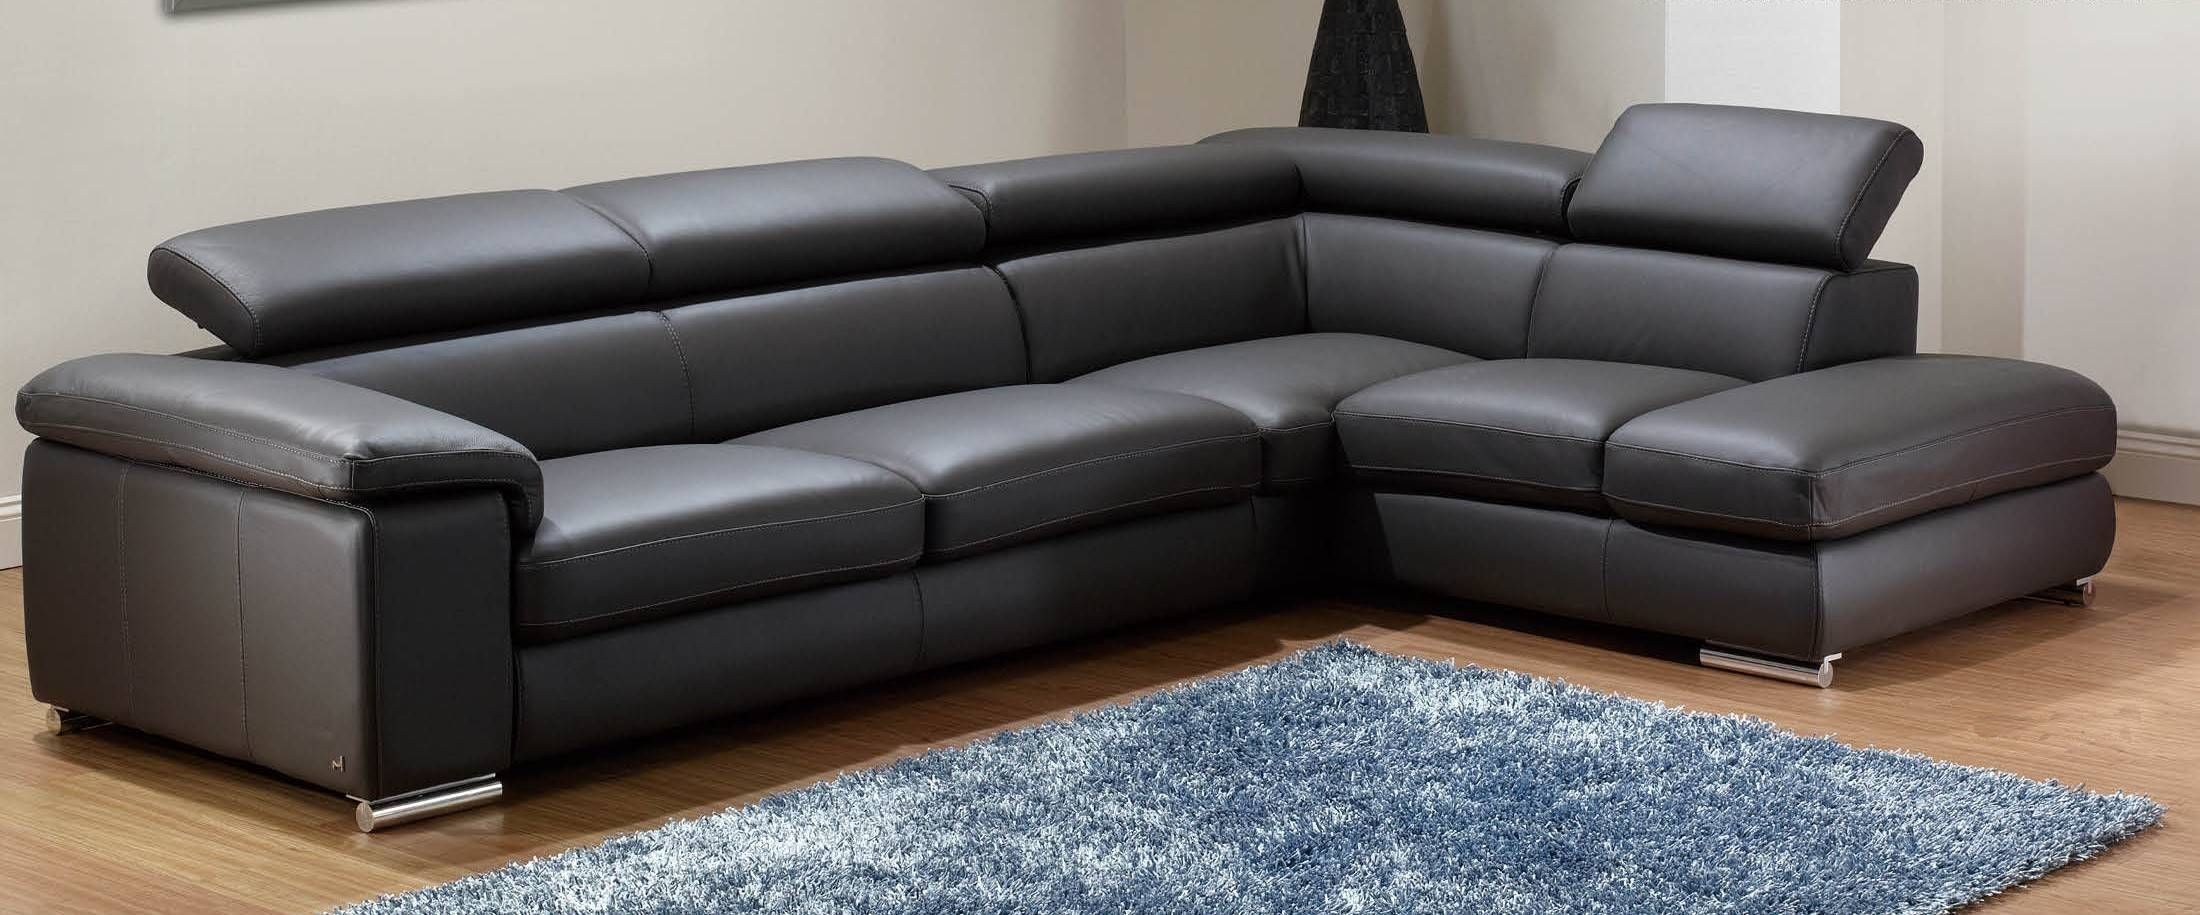 inexpensive leather sofa in nyc